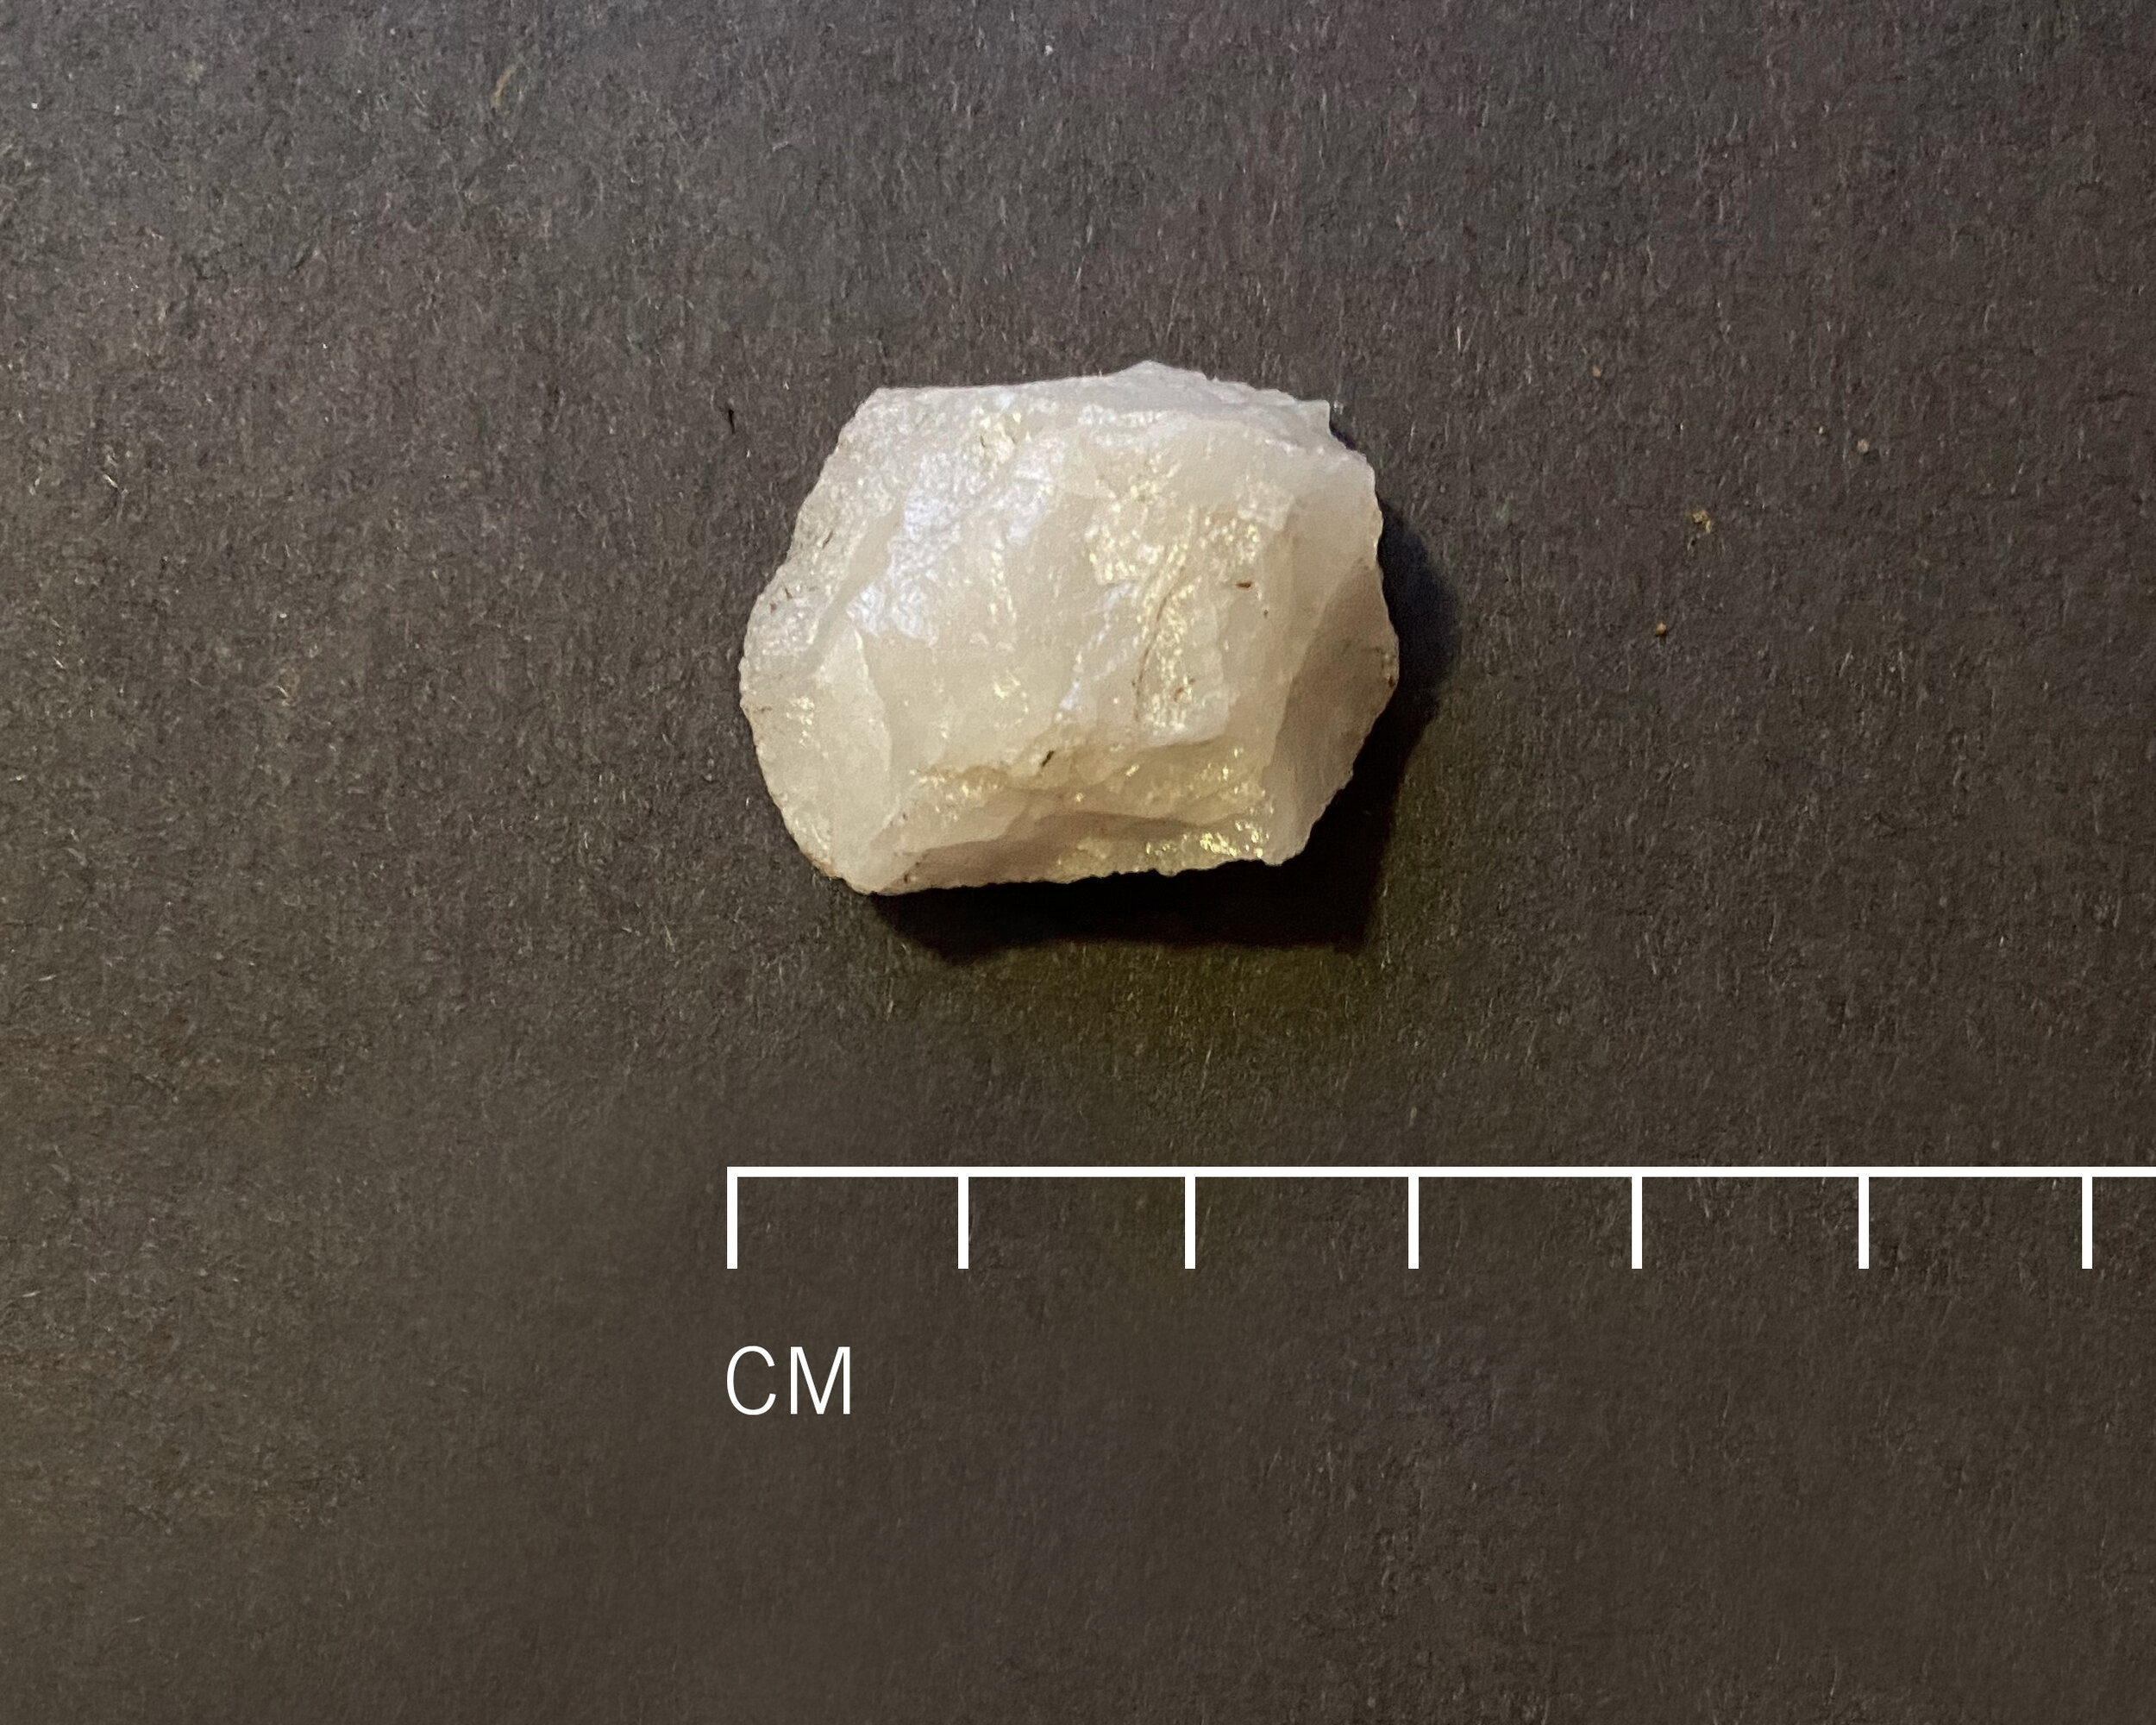   Quartz biface recovered during archaeological investigation.  Courtesy of Allison McGovern 